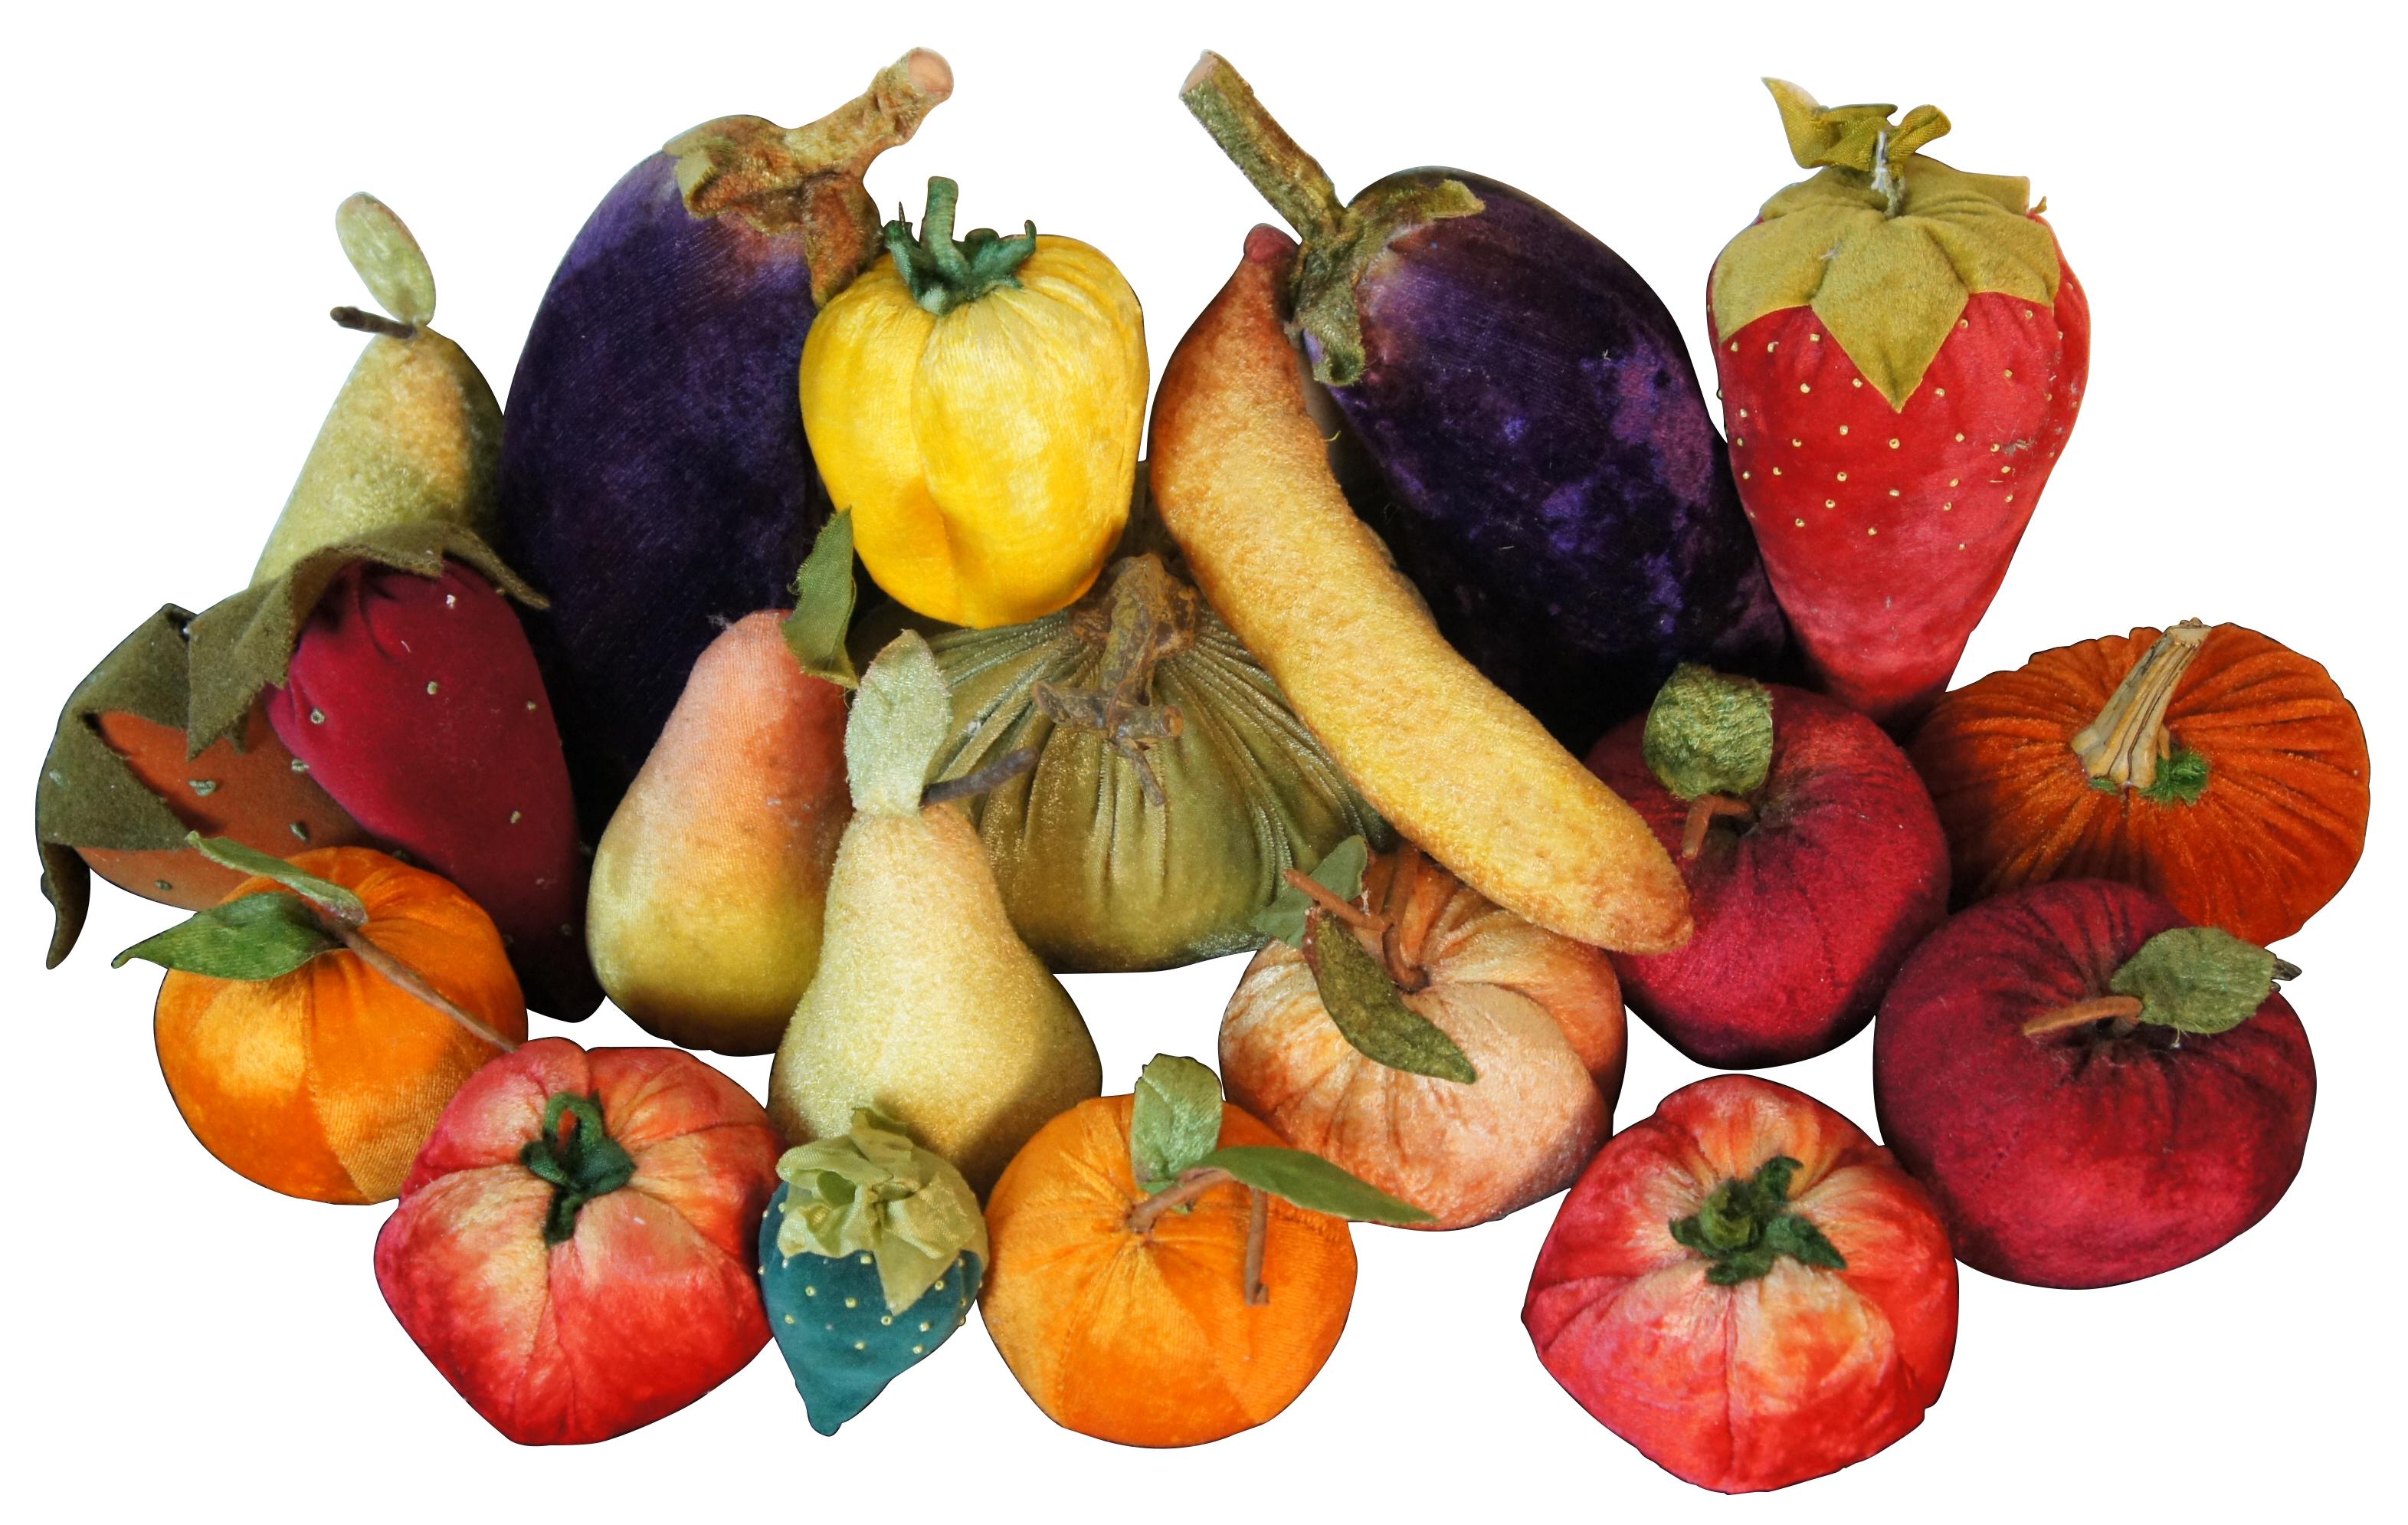 Lot of 20 pieces of velvet stuffed fruit and vegetables, including eggplant, strawberries, pears, apples, pumpkins, tomatoes, peaches/oranges, bell pepper and banana.

Largest (pumpkin) - 6” x 5.5” x 4.75” (width x depth x height).
 